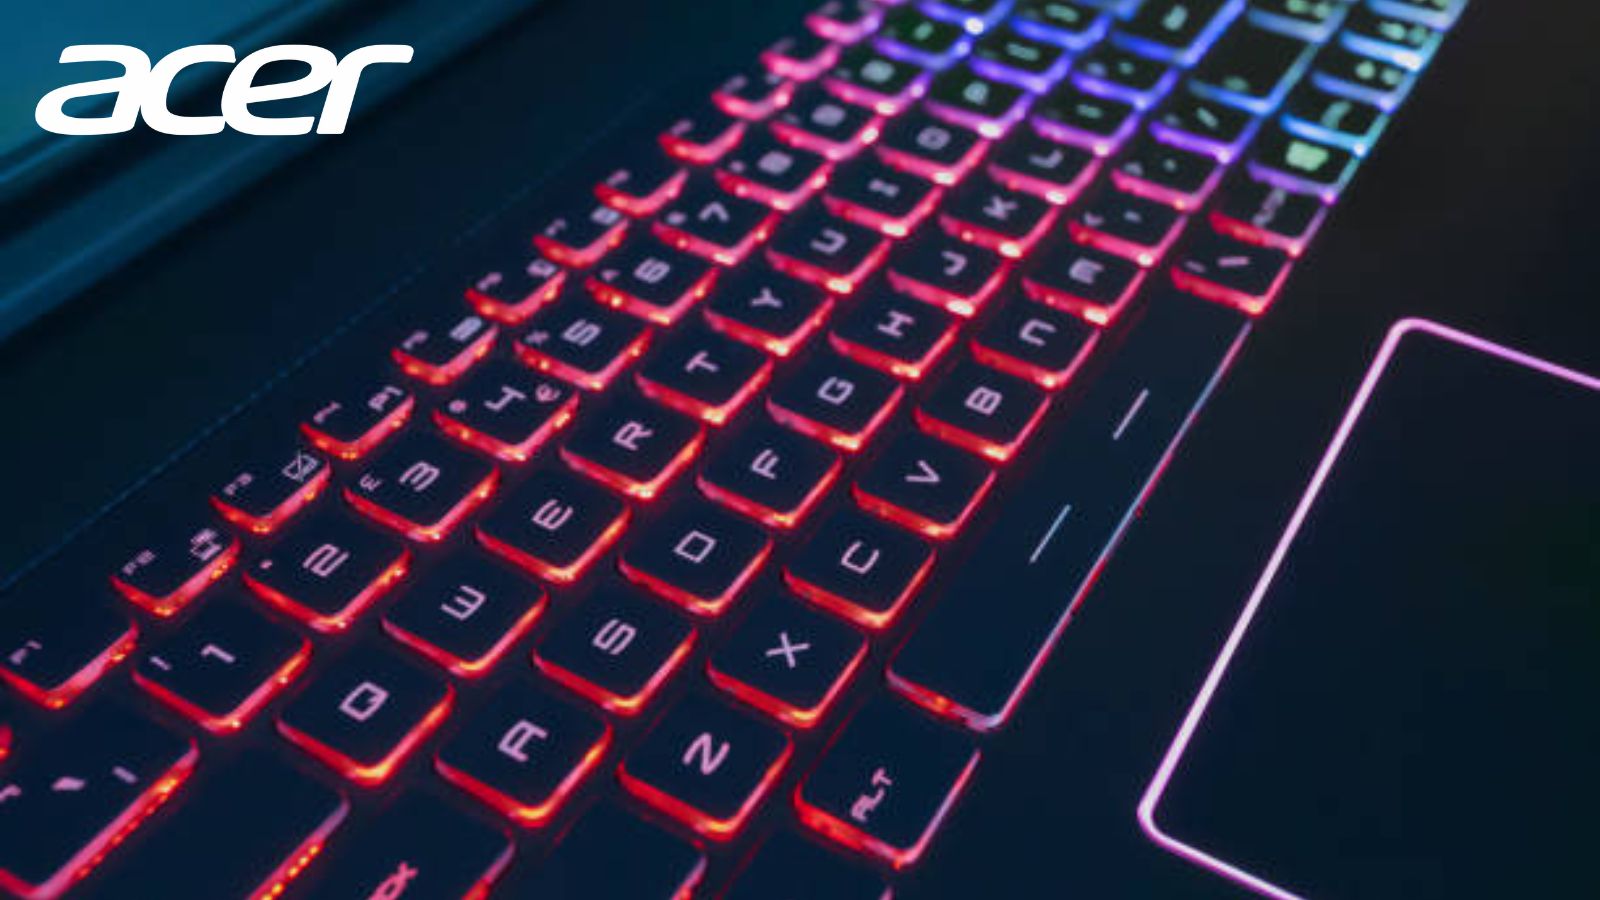 How To Turn On Keyboard Light On Acer Most Complete Guide